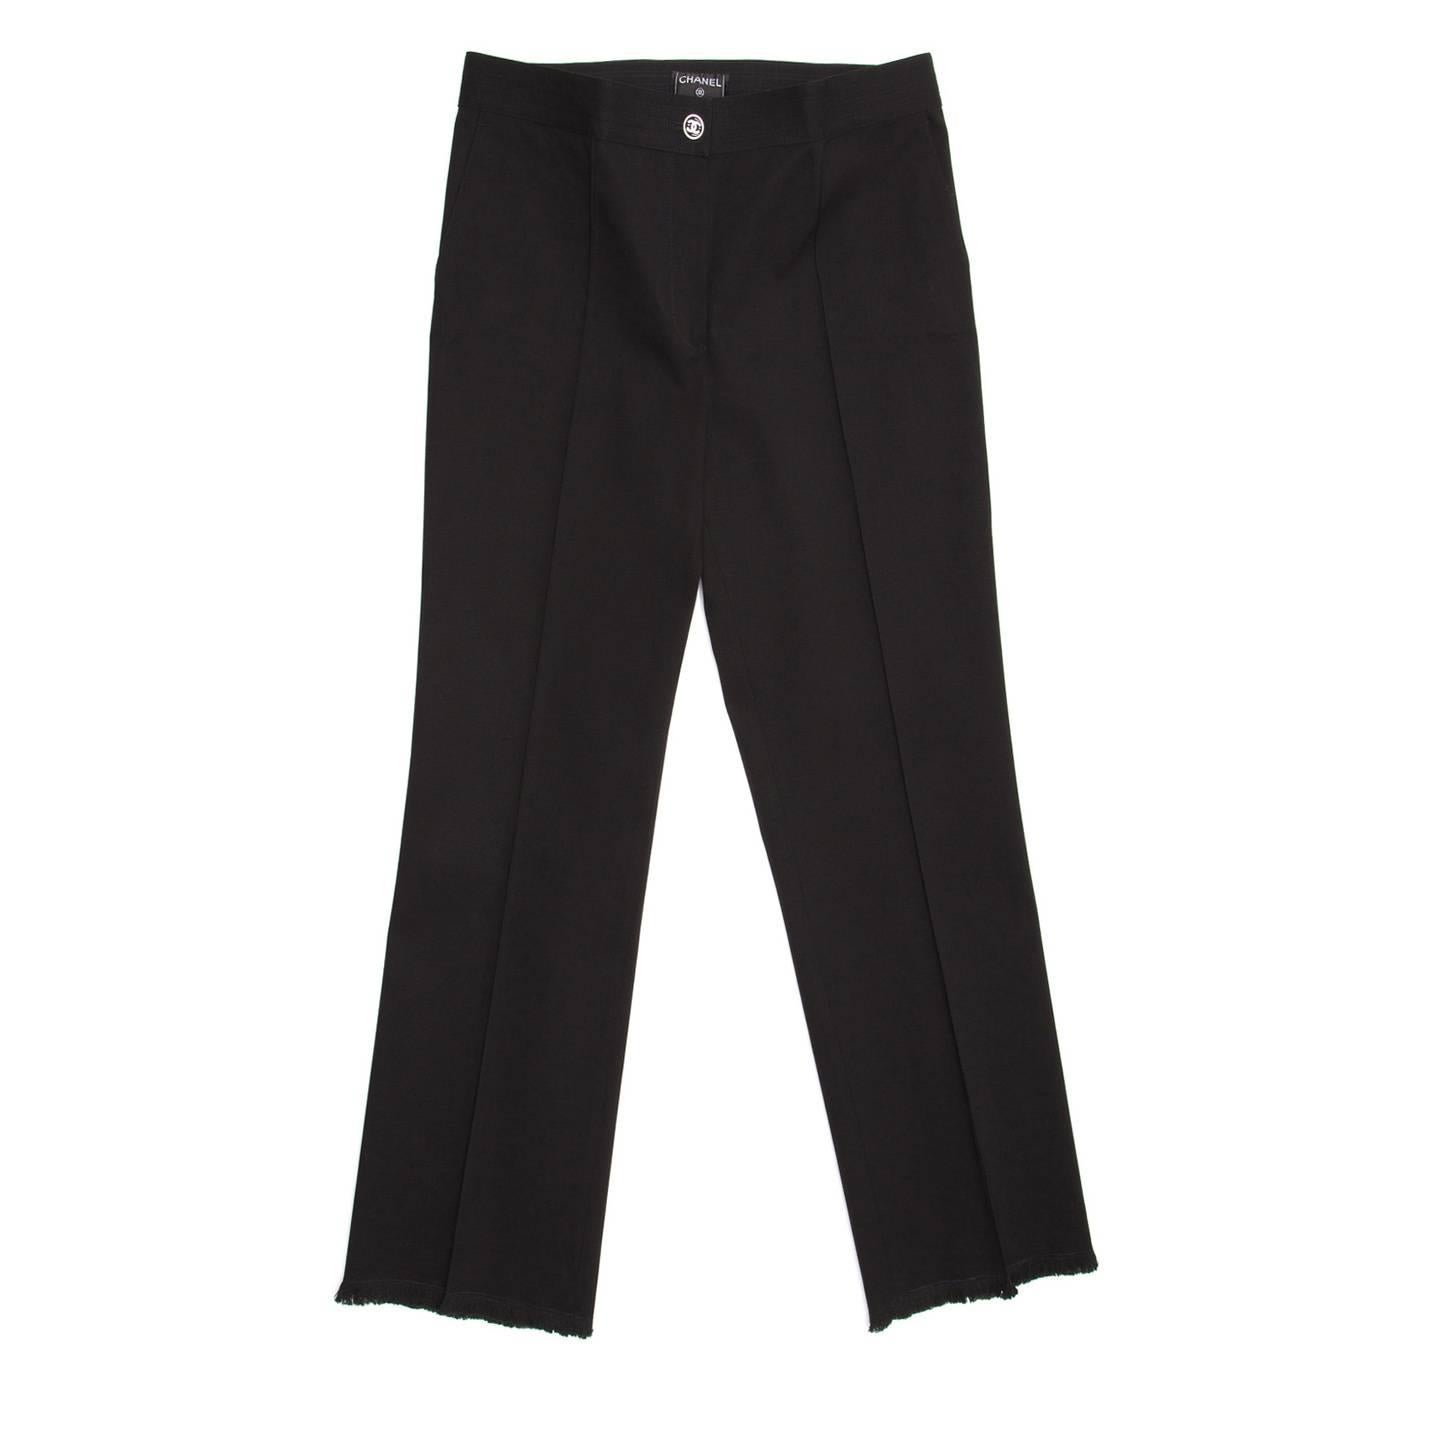 Beautiful fitting low waist black cotton/spandex trousers with vertical slash pockets at front and an horizontal slit pocket at back. The front is flat, the waist fastens at center front with a black and silver Chanel button, the legs are straight